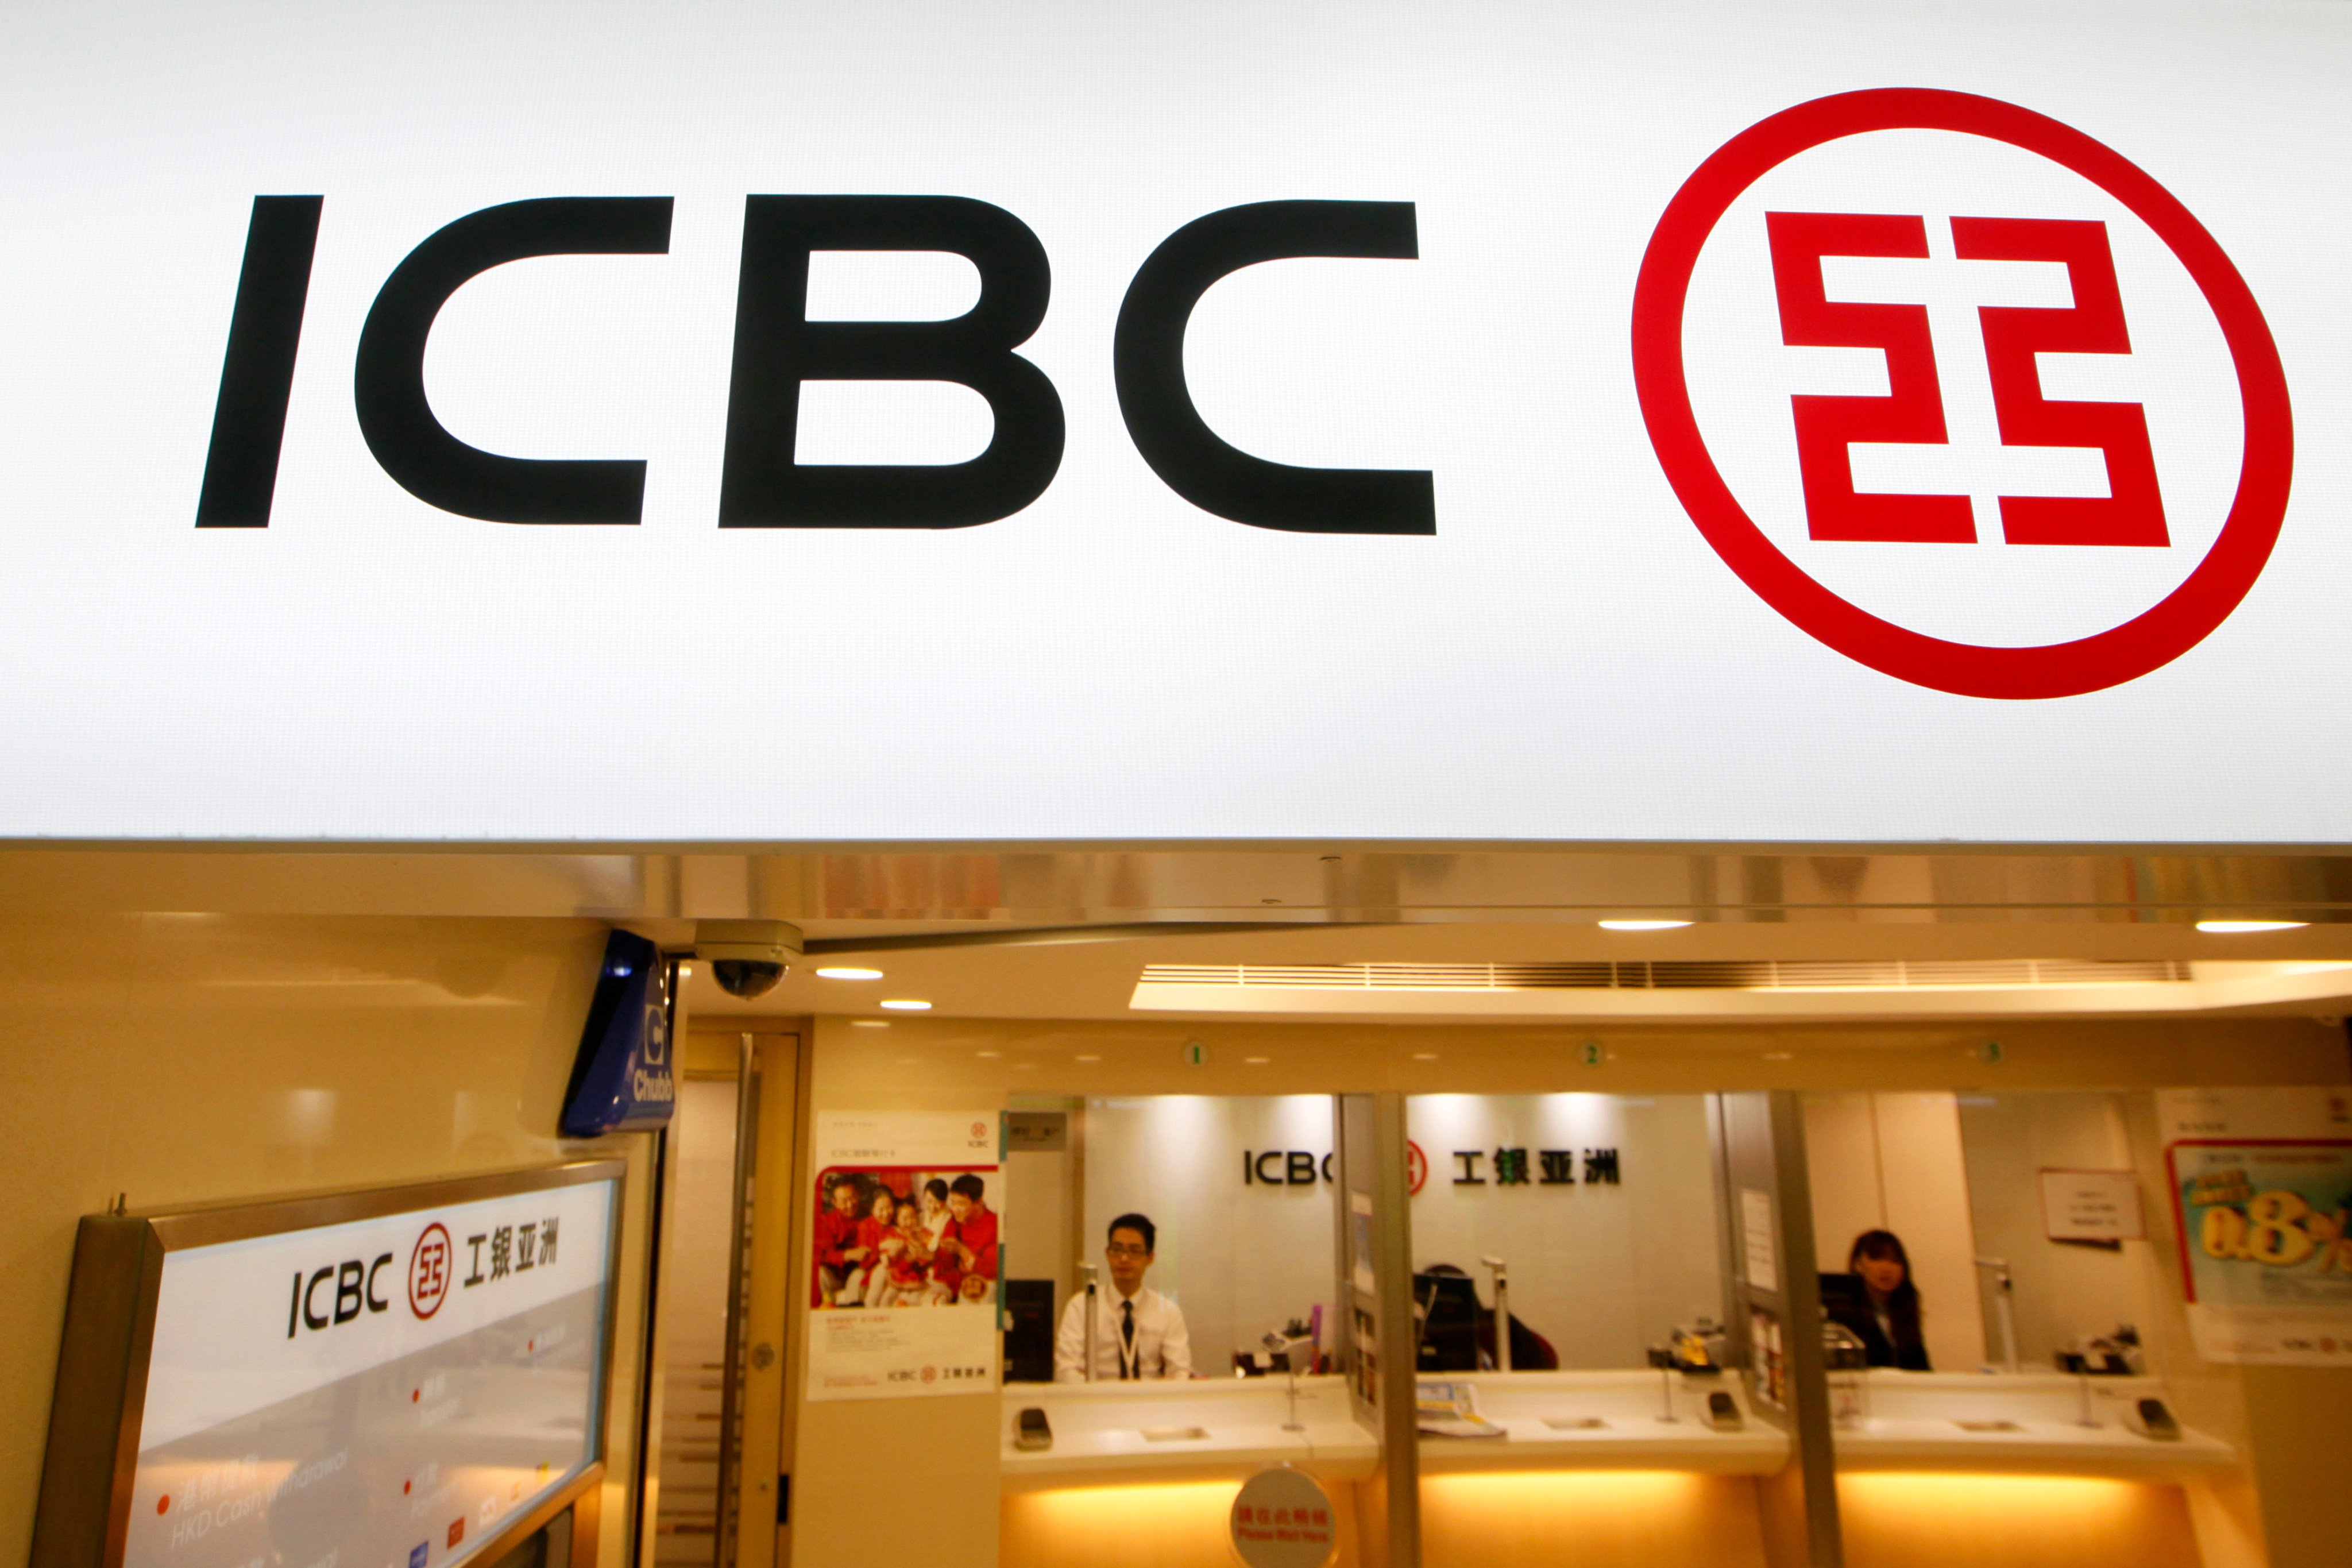 Bank tellers sit in a branch office of the Industrial and Commercial Bank of China (ICBC) in Hong Kong on March 27, 2013. On Thursday, ICBC cut its demand deposit rate by 5 basis points to 0.15 per cent and one-year deposit rate by 10 bps to 1.35 per cent, in a move expected to improve its net interest margin. ICBC’s shares fell 1.4 per cent to HK$4.33. Photo: AP